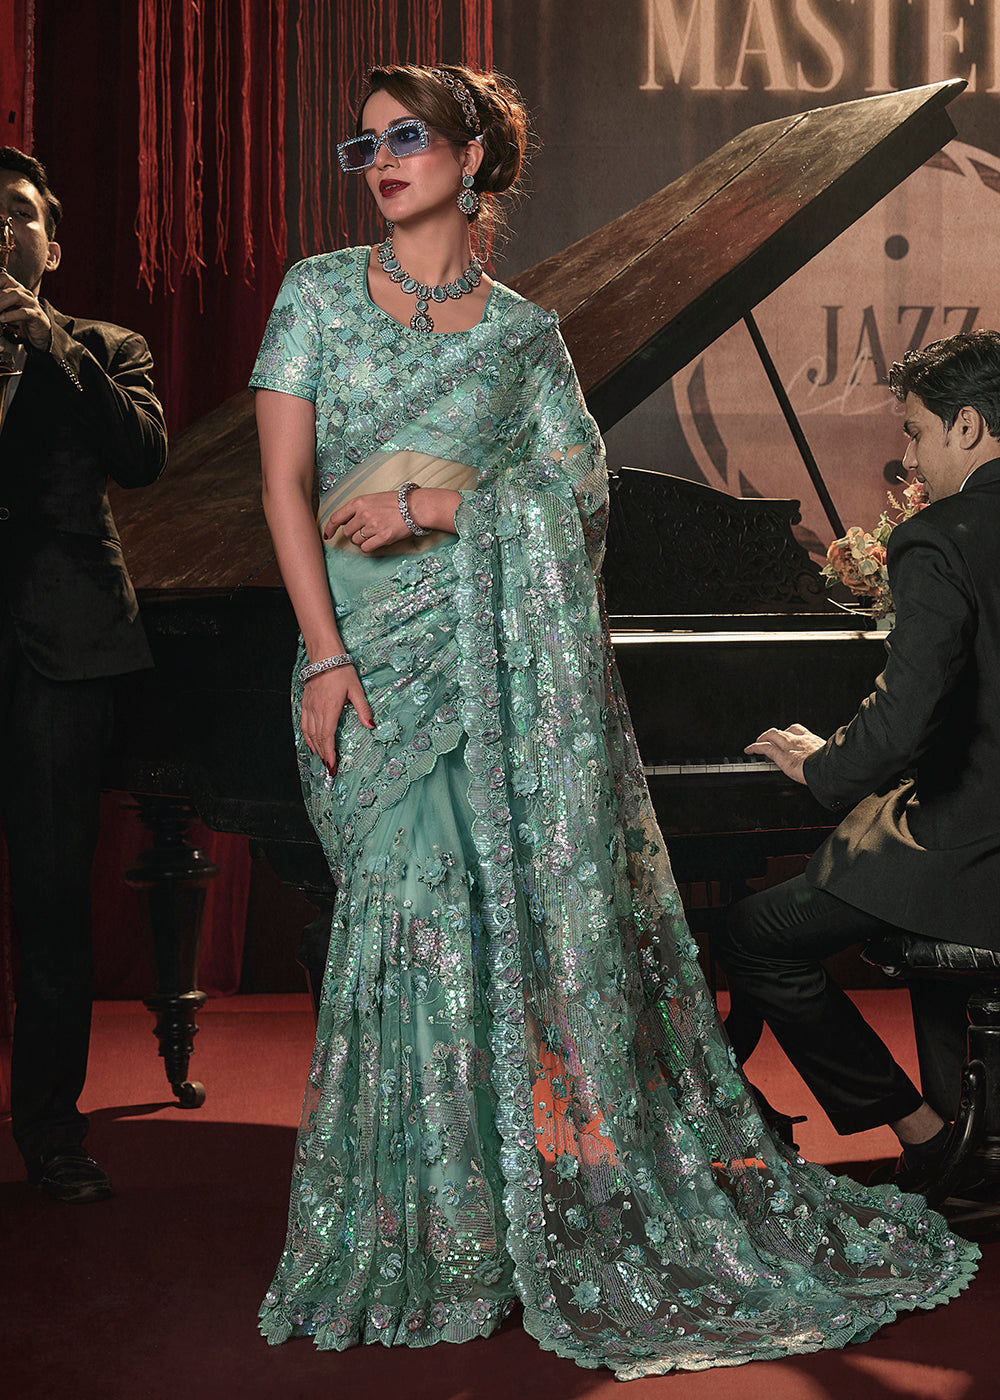 Shop Now Wedding Party Sea Green Net Embroidered Designer Saree from Empress Clothing in USA, UK, Canada & Worldwide. 